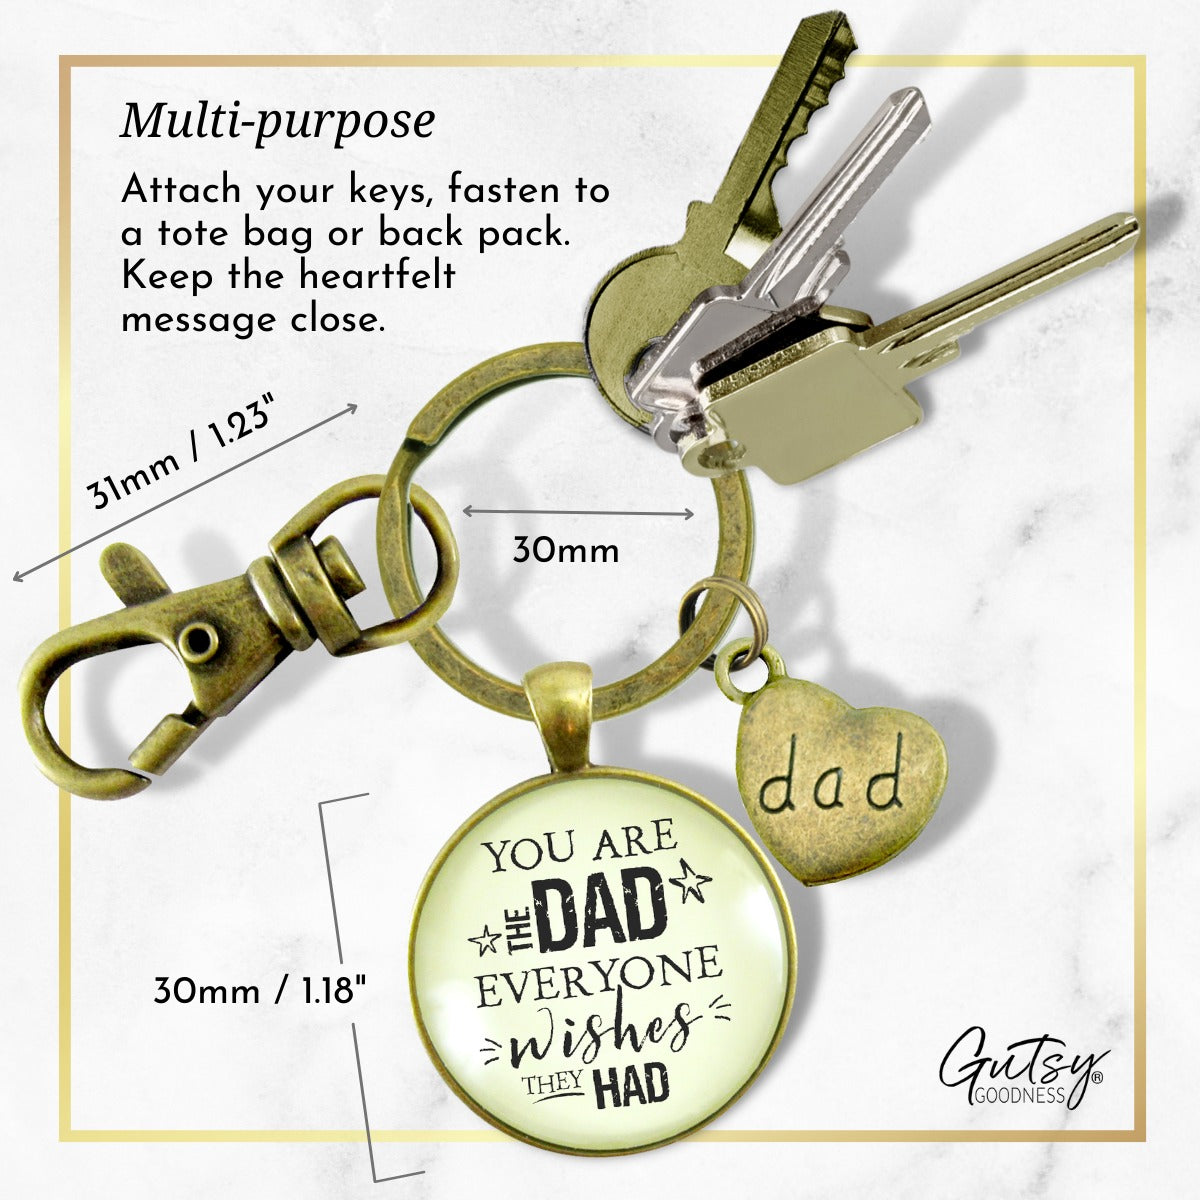 You Are The Dad Everyone Wishes They Had Keychain  Keychain - Men - Gutsy Goodness Handmade Jewelry